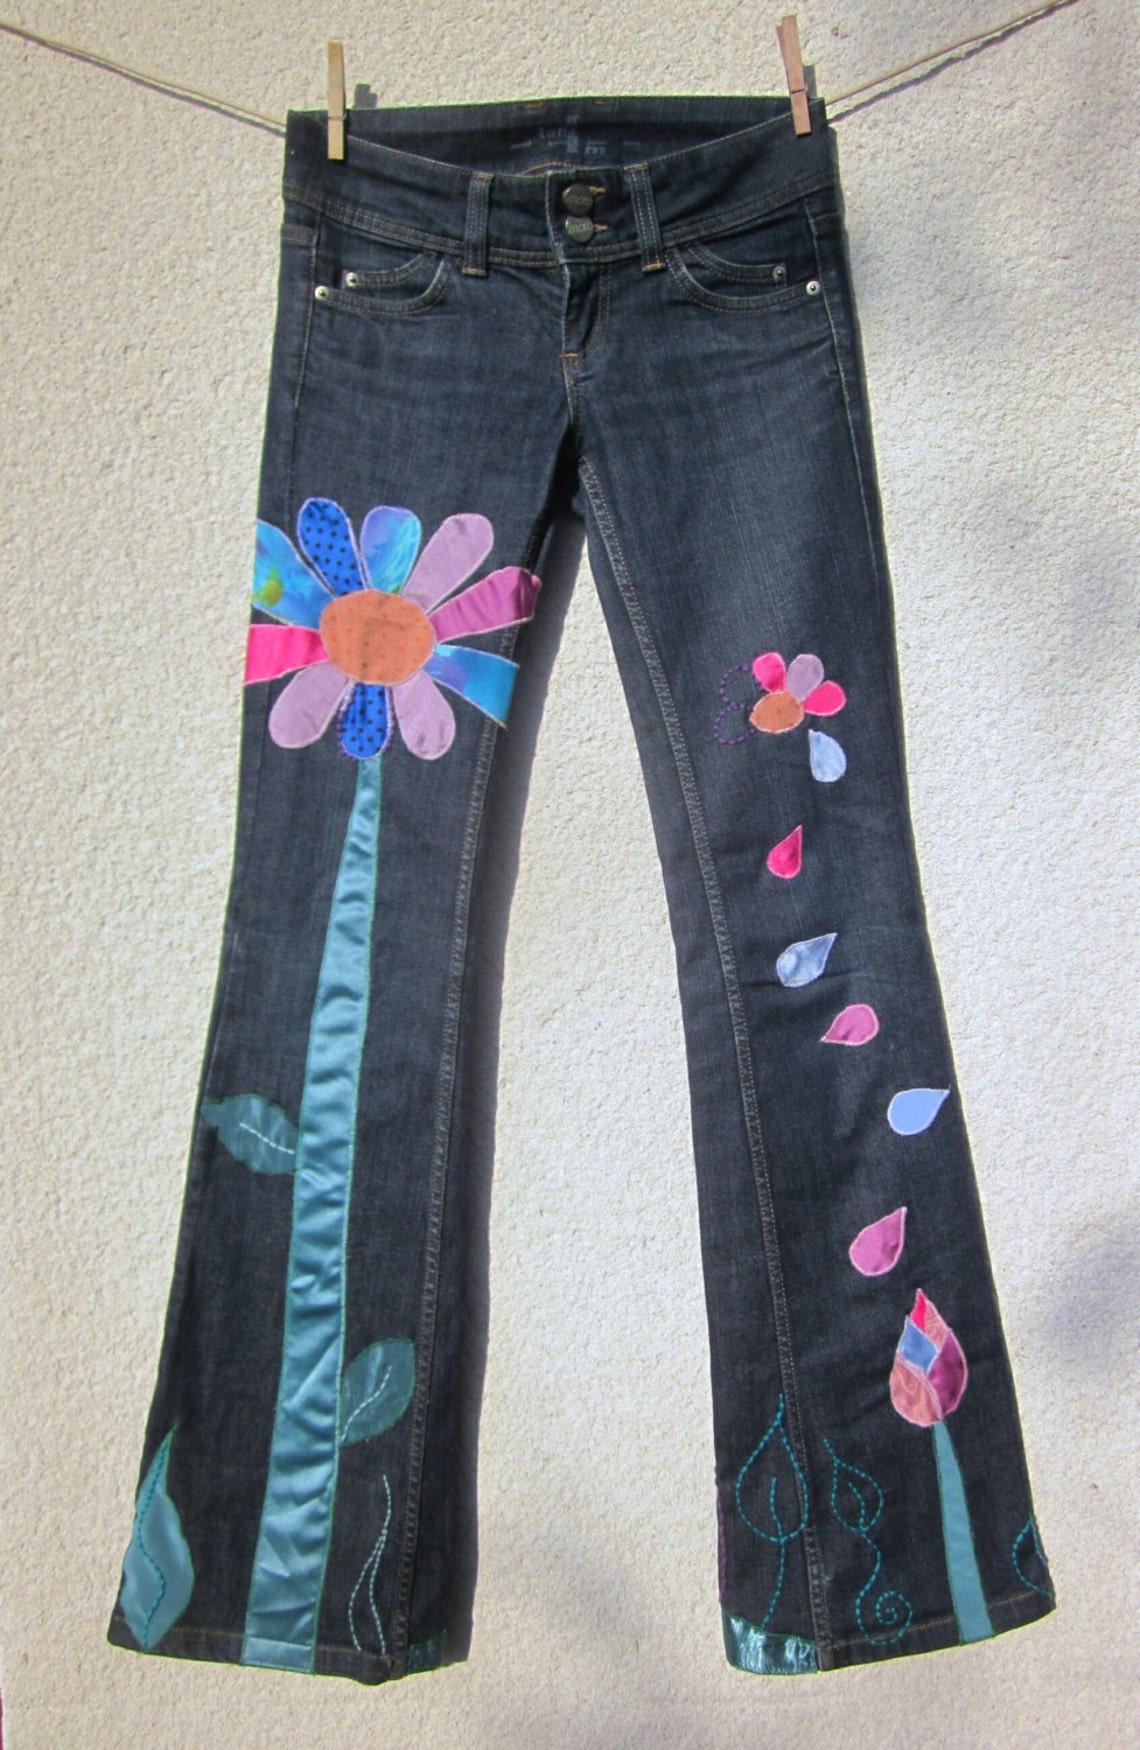 hippie boho jeans with flowers | Etsy